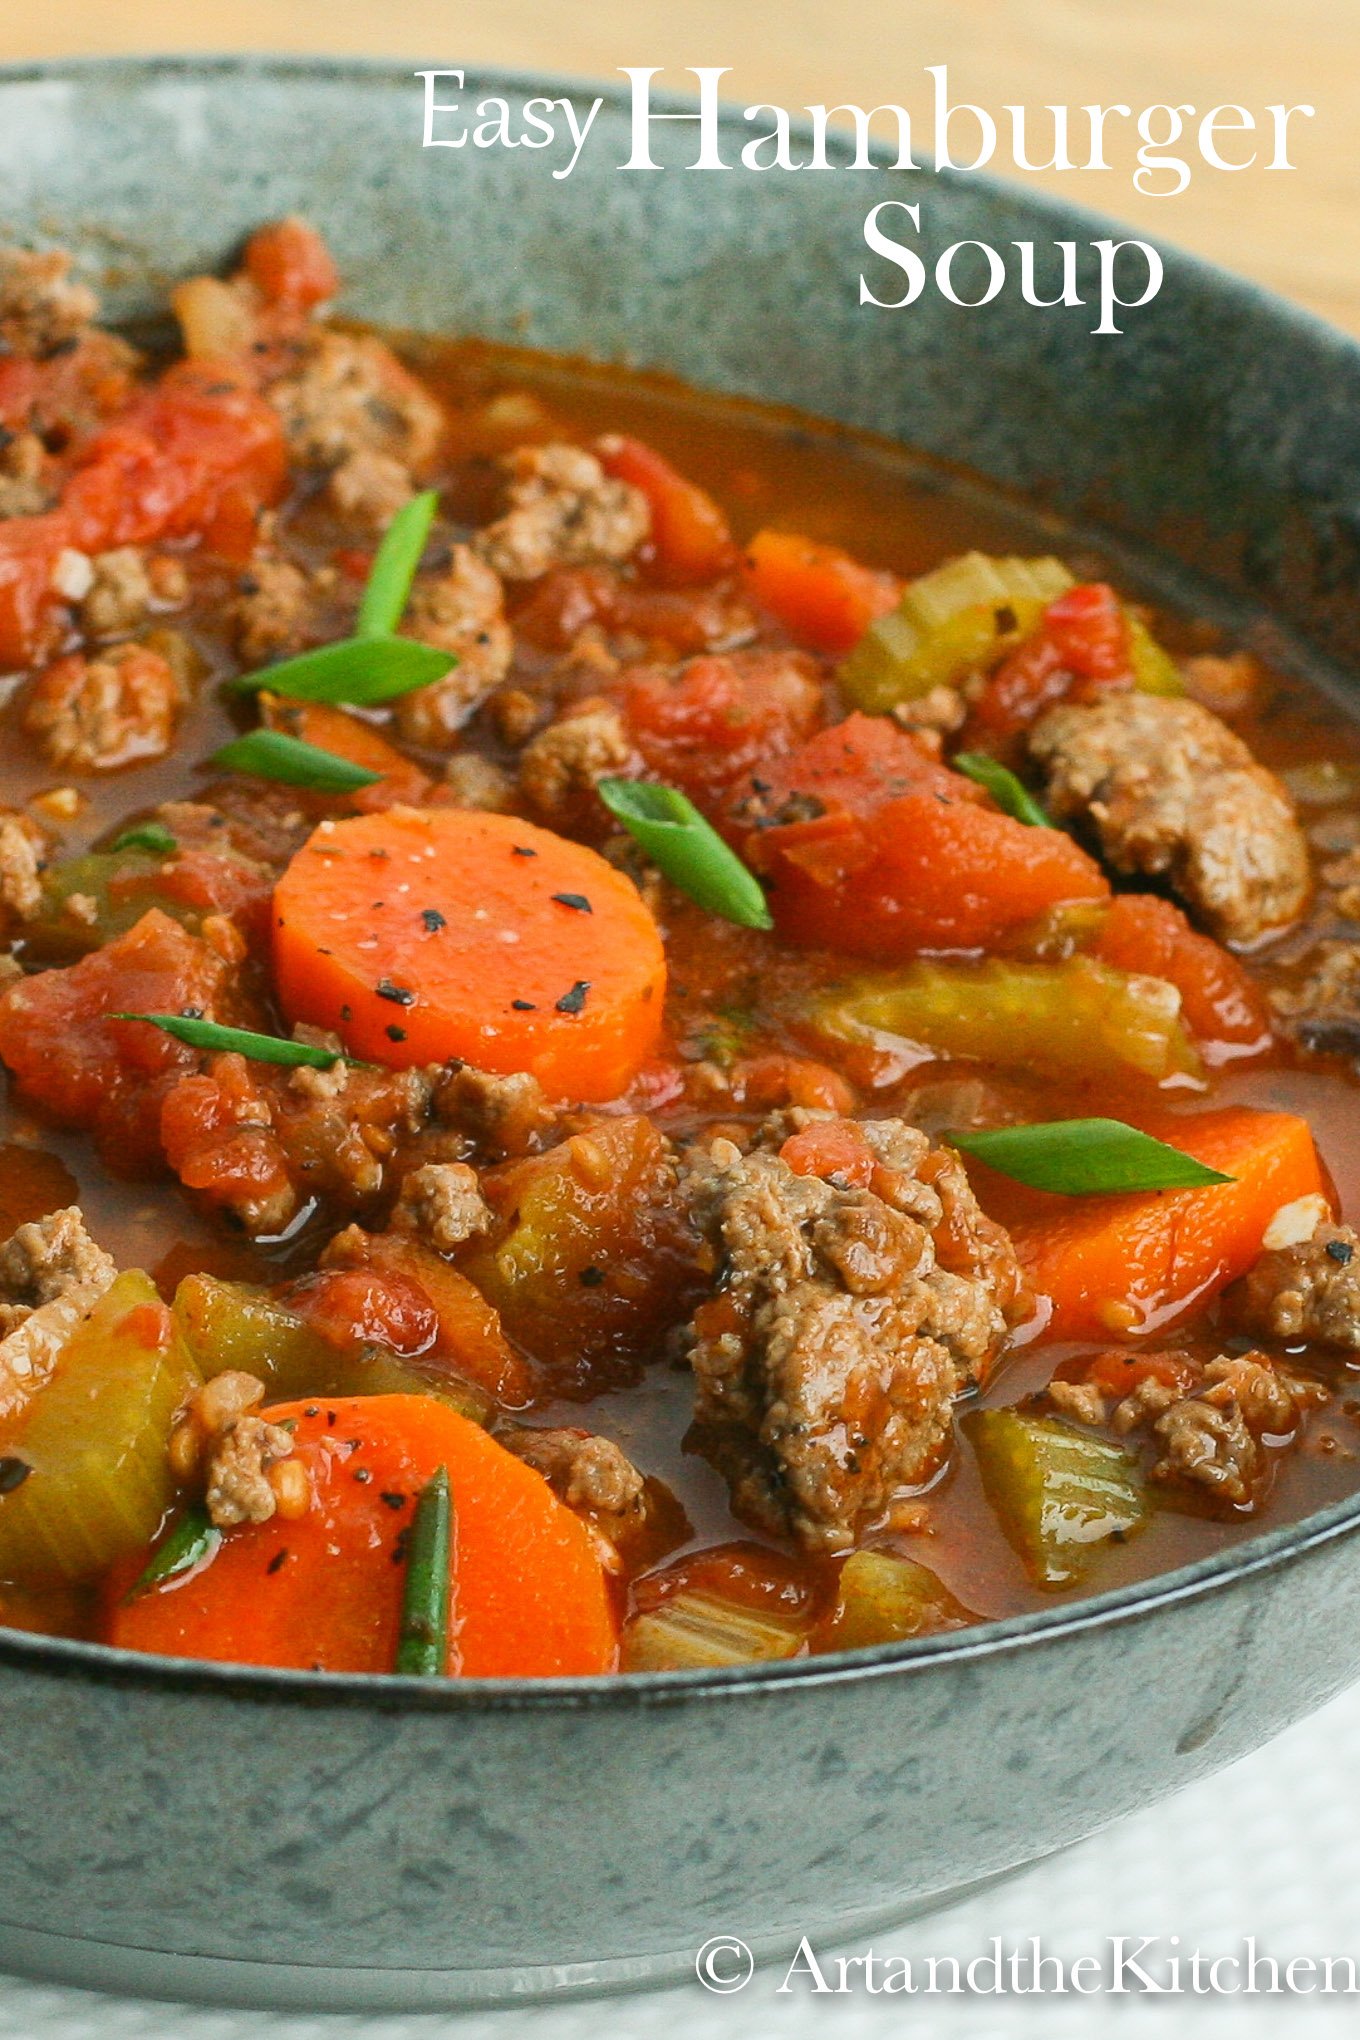 Easy to make Hamburger soup. Loaded with ground beef, carrots, celery  in a savory broth. via @artandthekitch